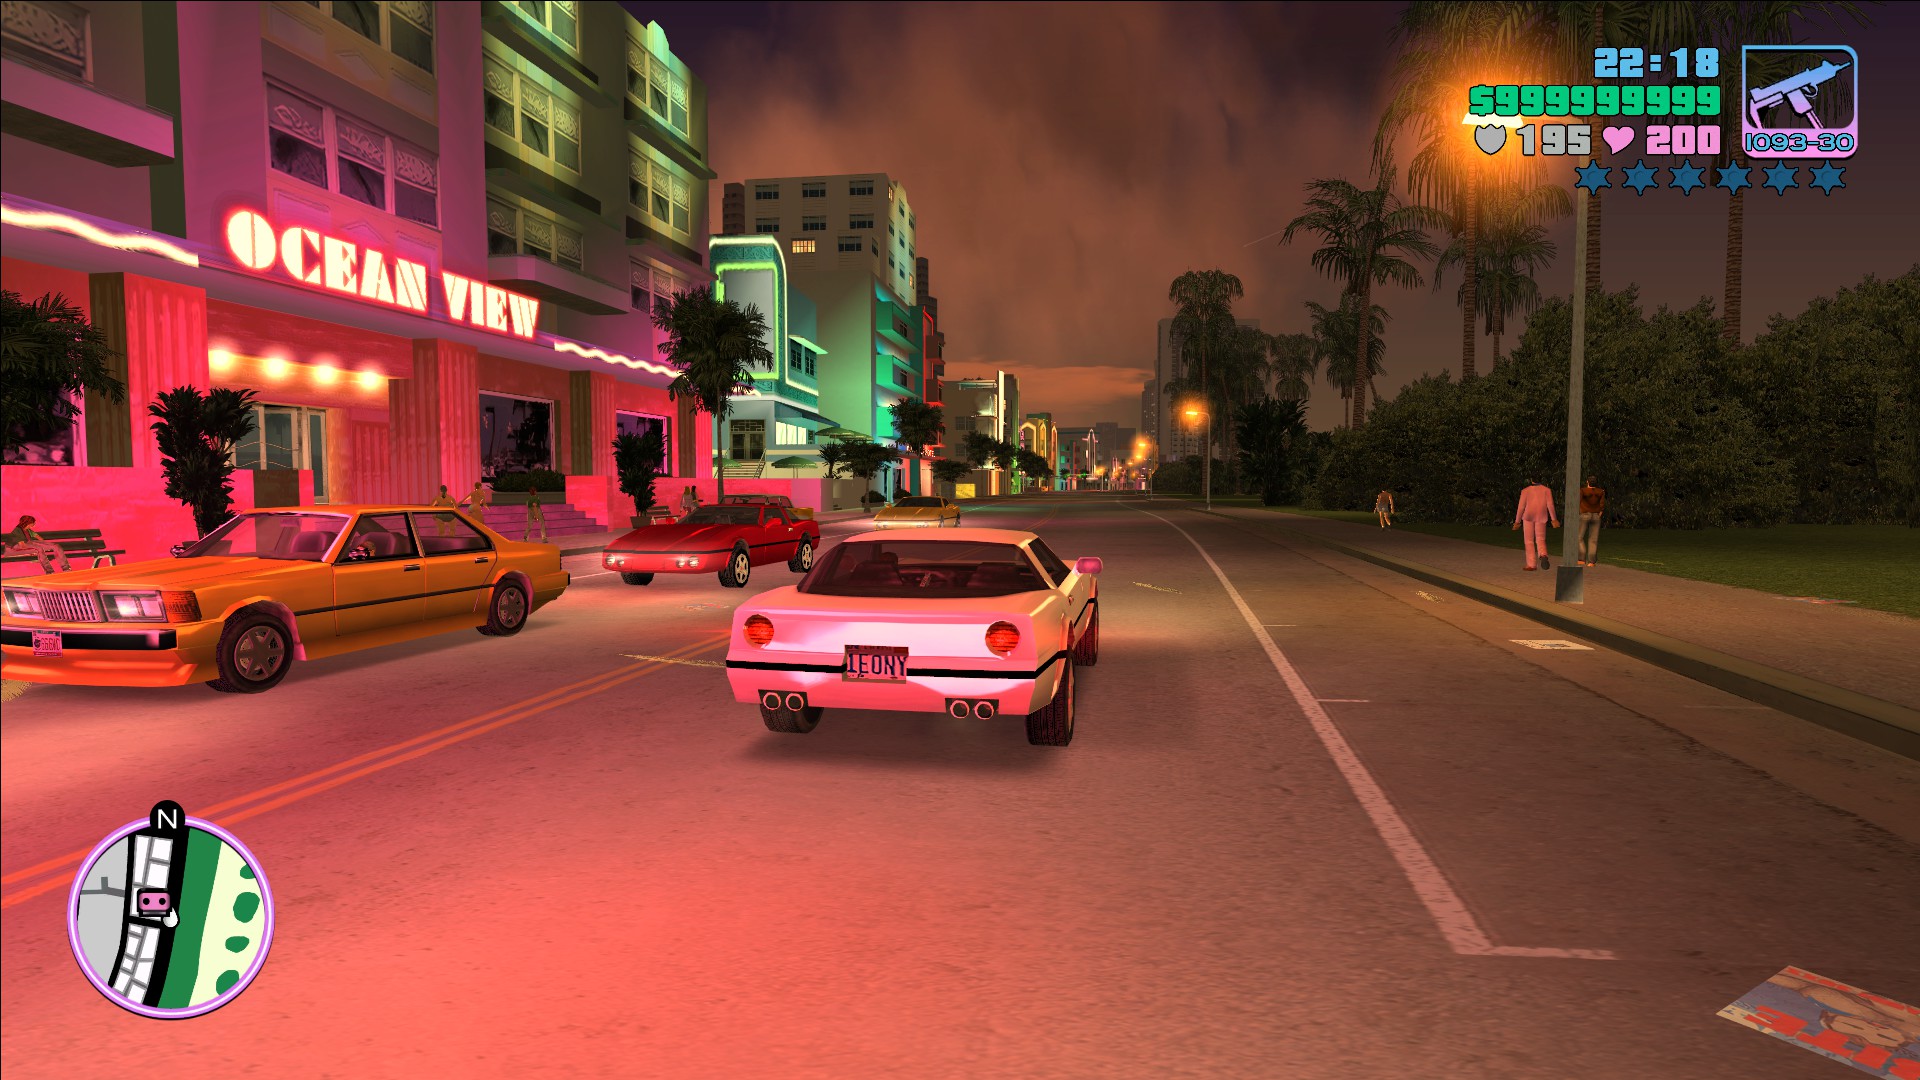 Grand Theft Auto: Vice City: The Definitive Edition